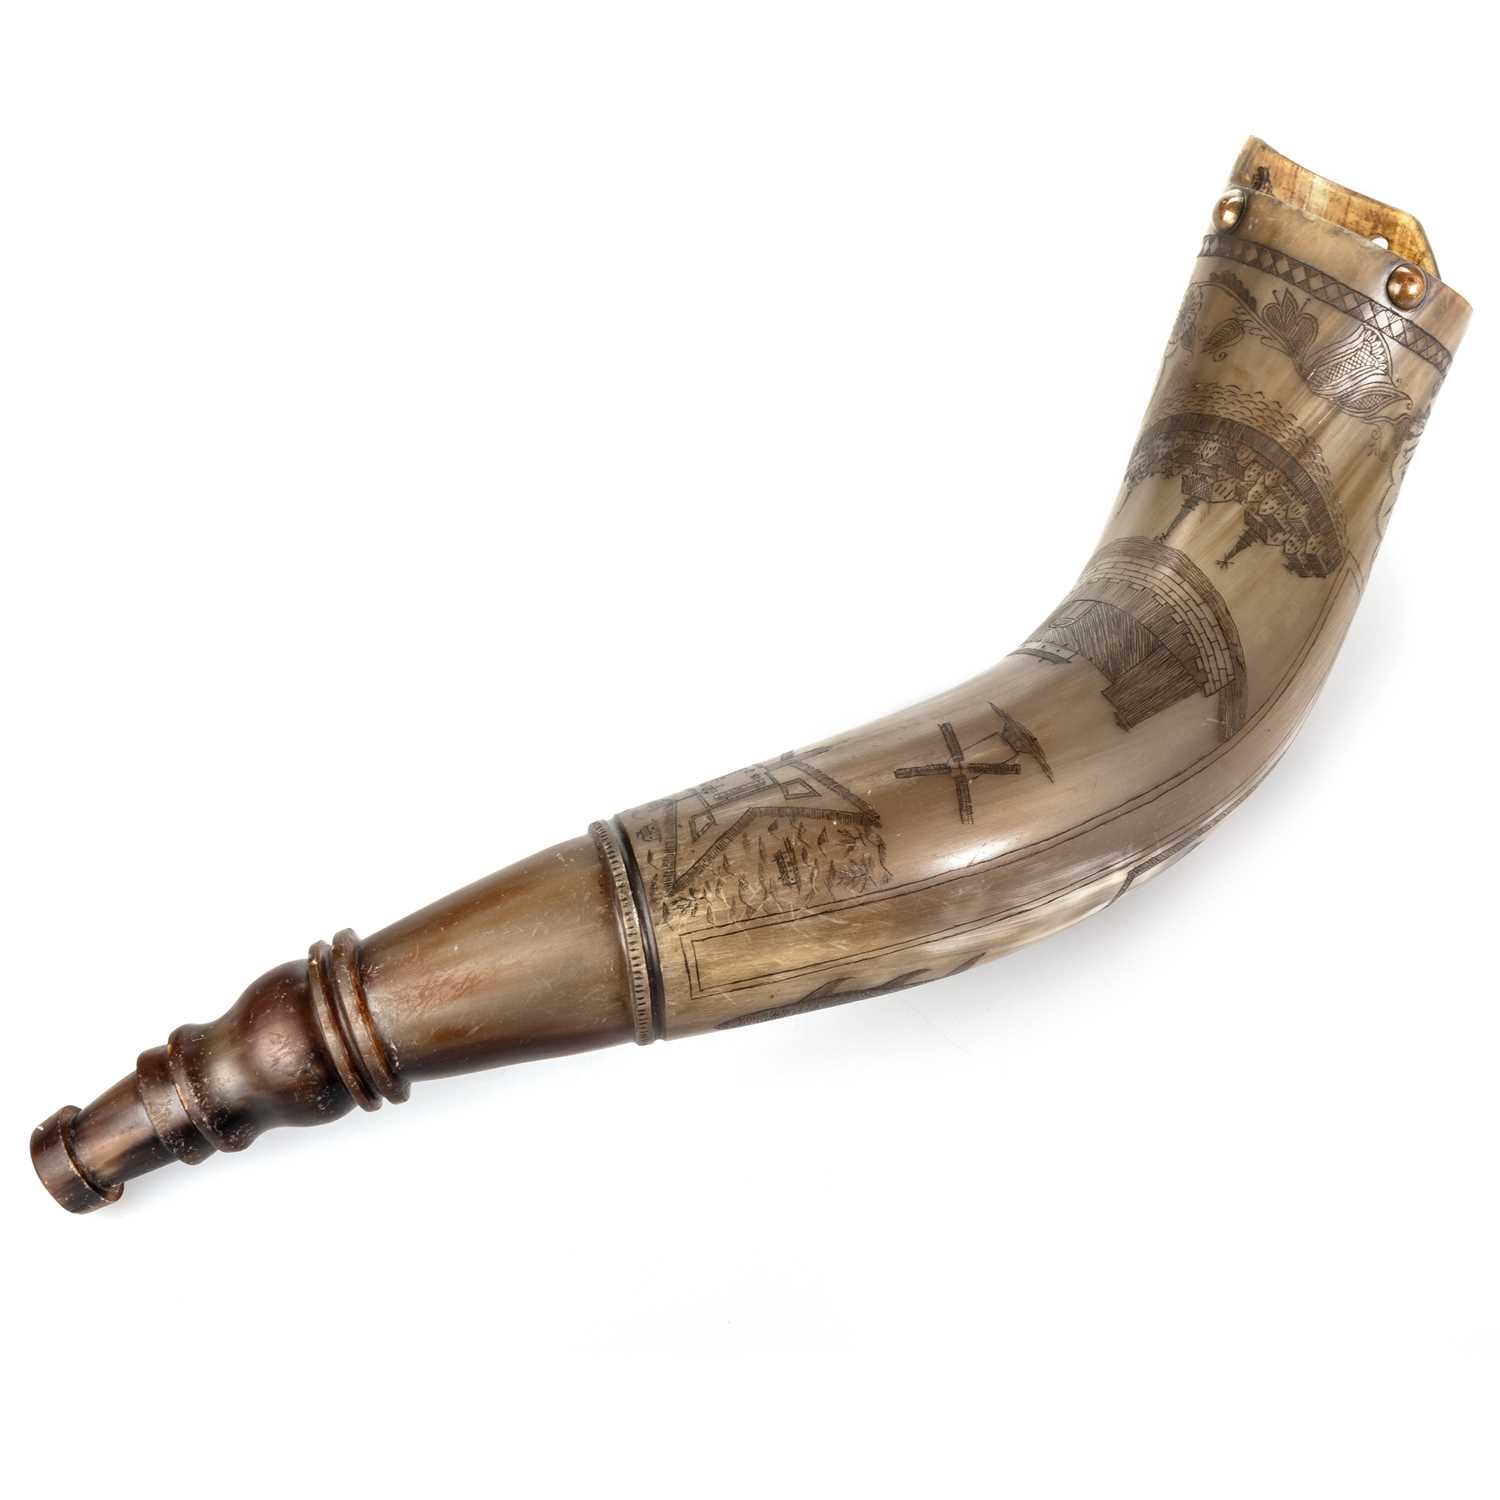 A SCRIMSHAW DECORATED POWDER HORN - Image 5 of 6